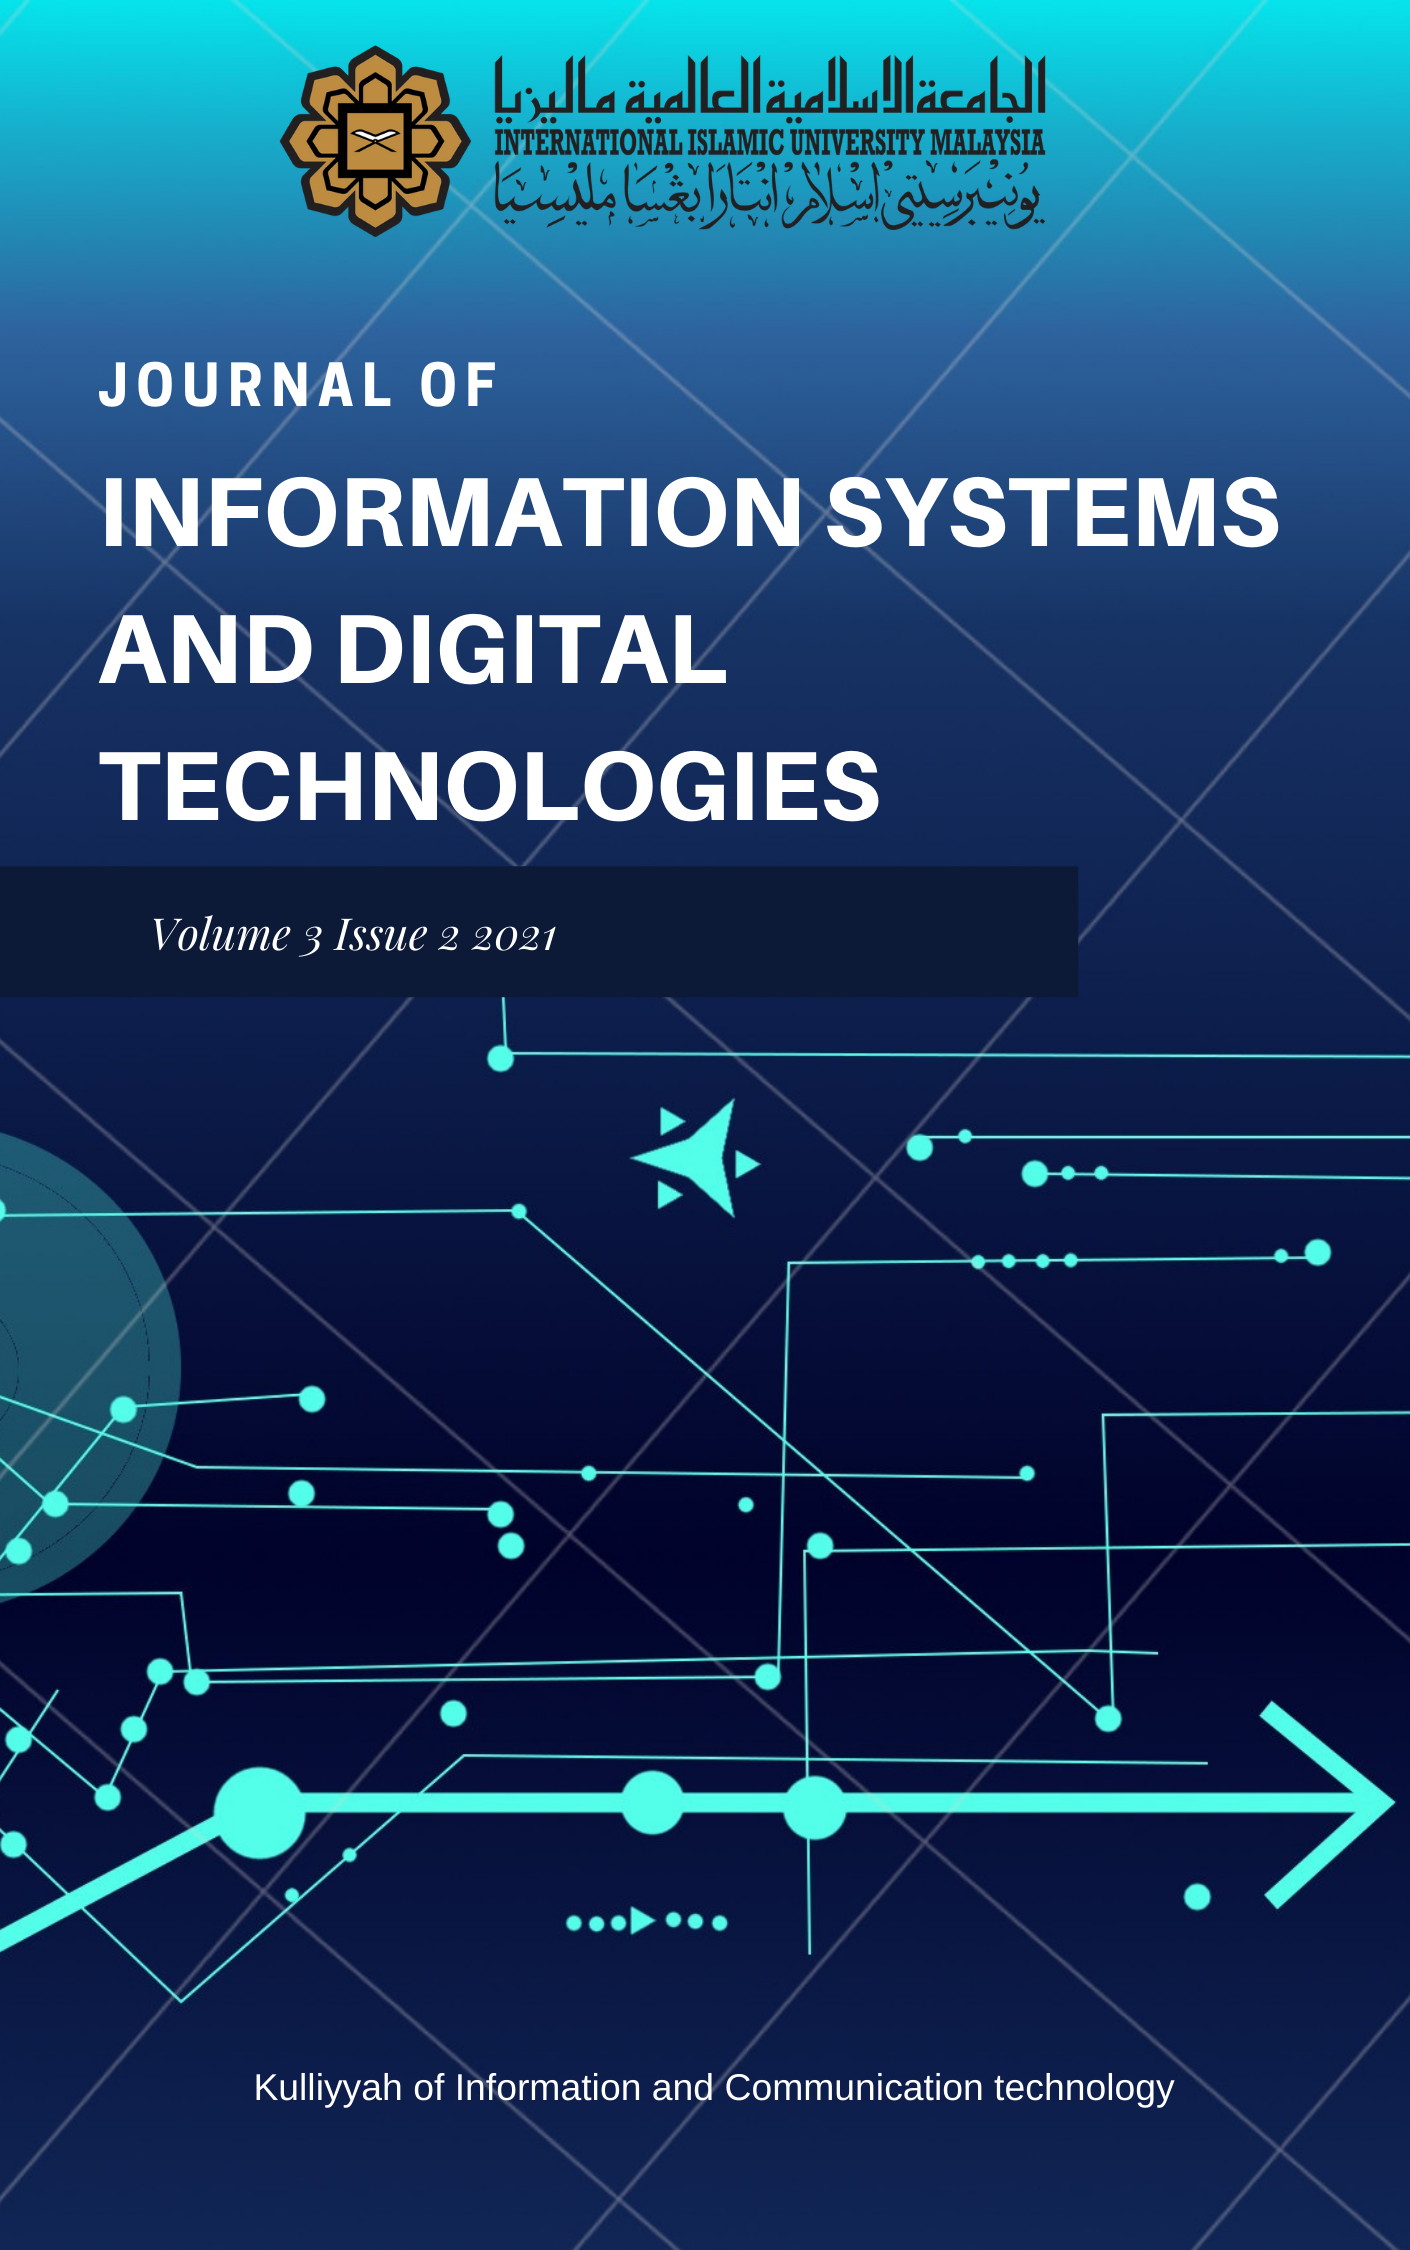 					View Vol. 3 No. 2 (2021): Journal of Information Systems and Digital Technologies
				